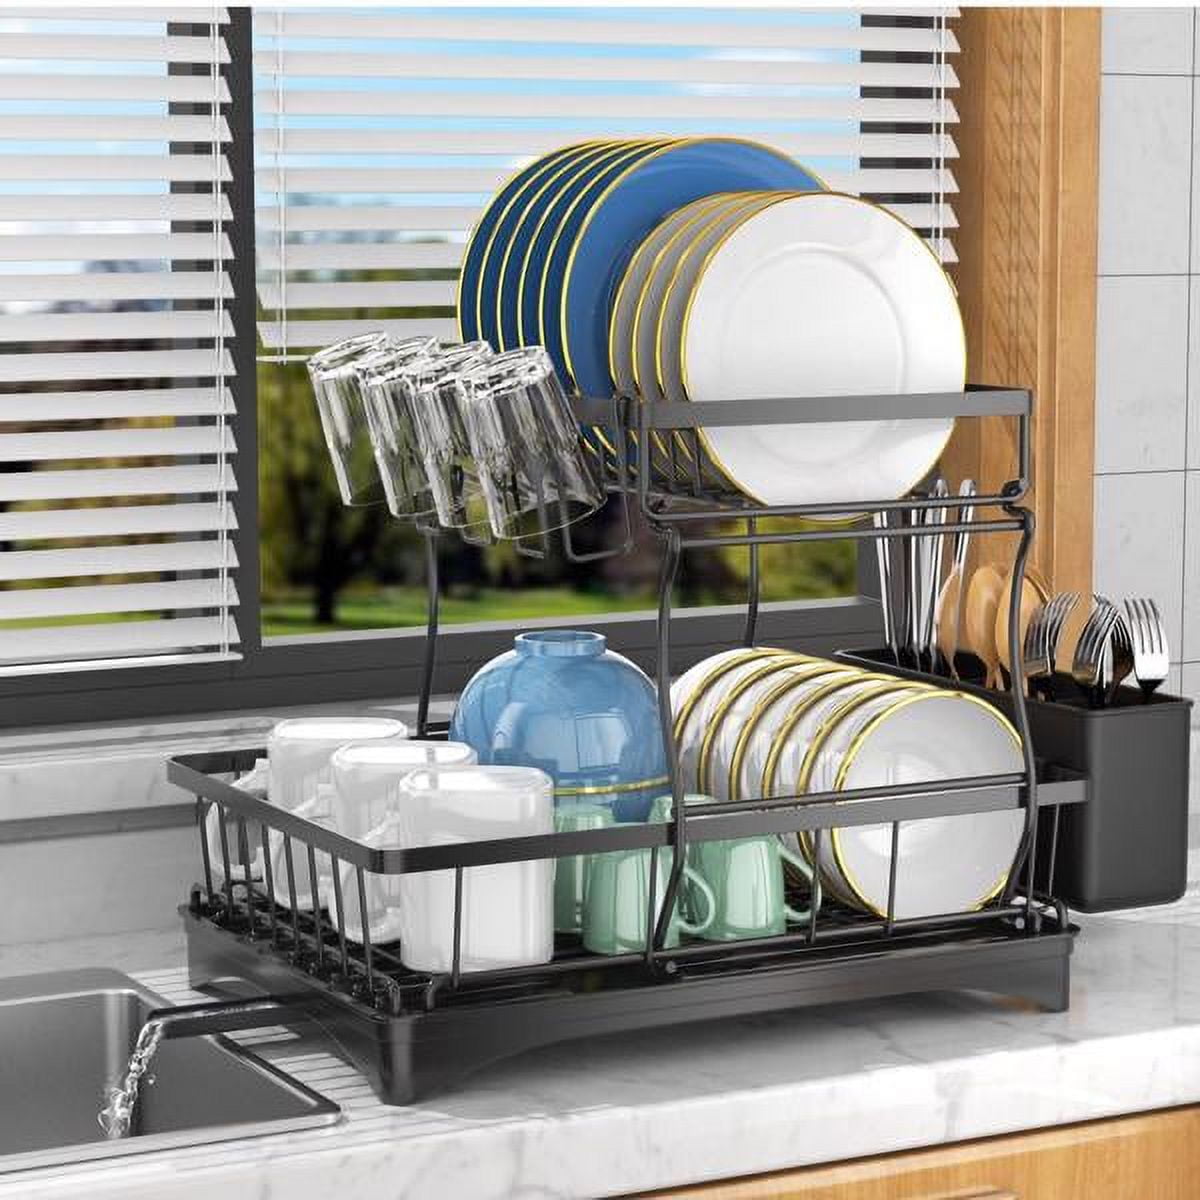 Mukay Dish Rack for Kitchen Counter - Dish Drying Rack with 360